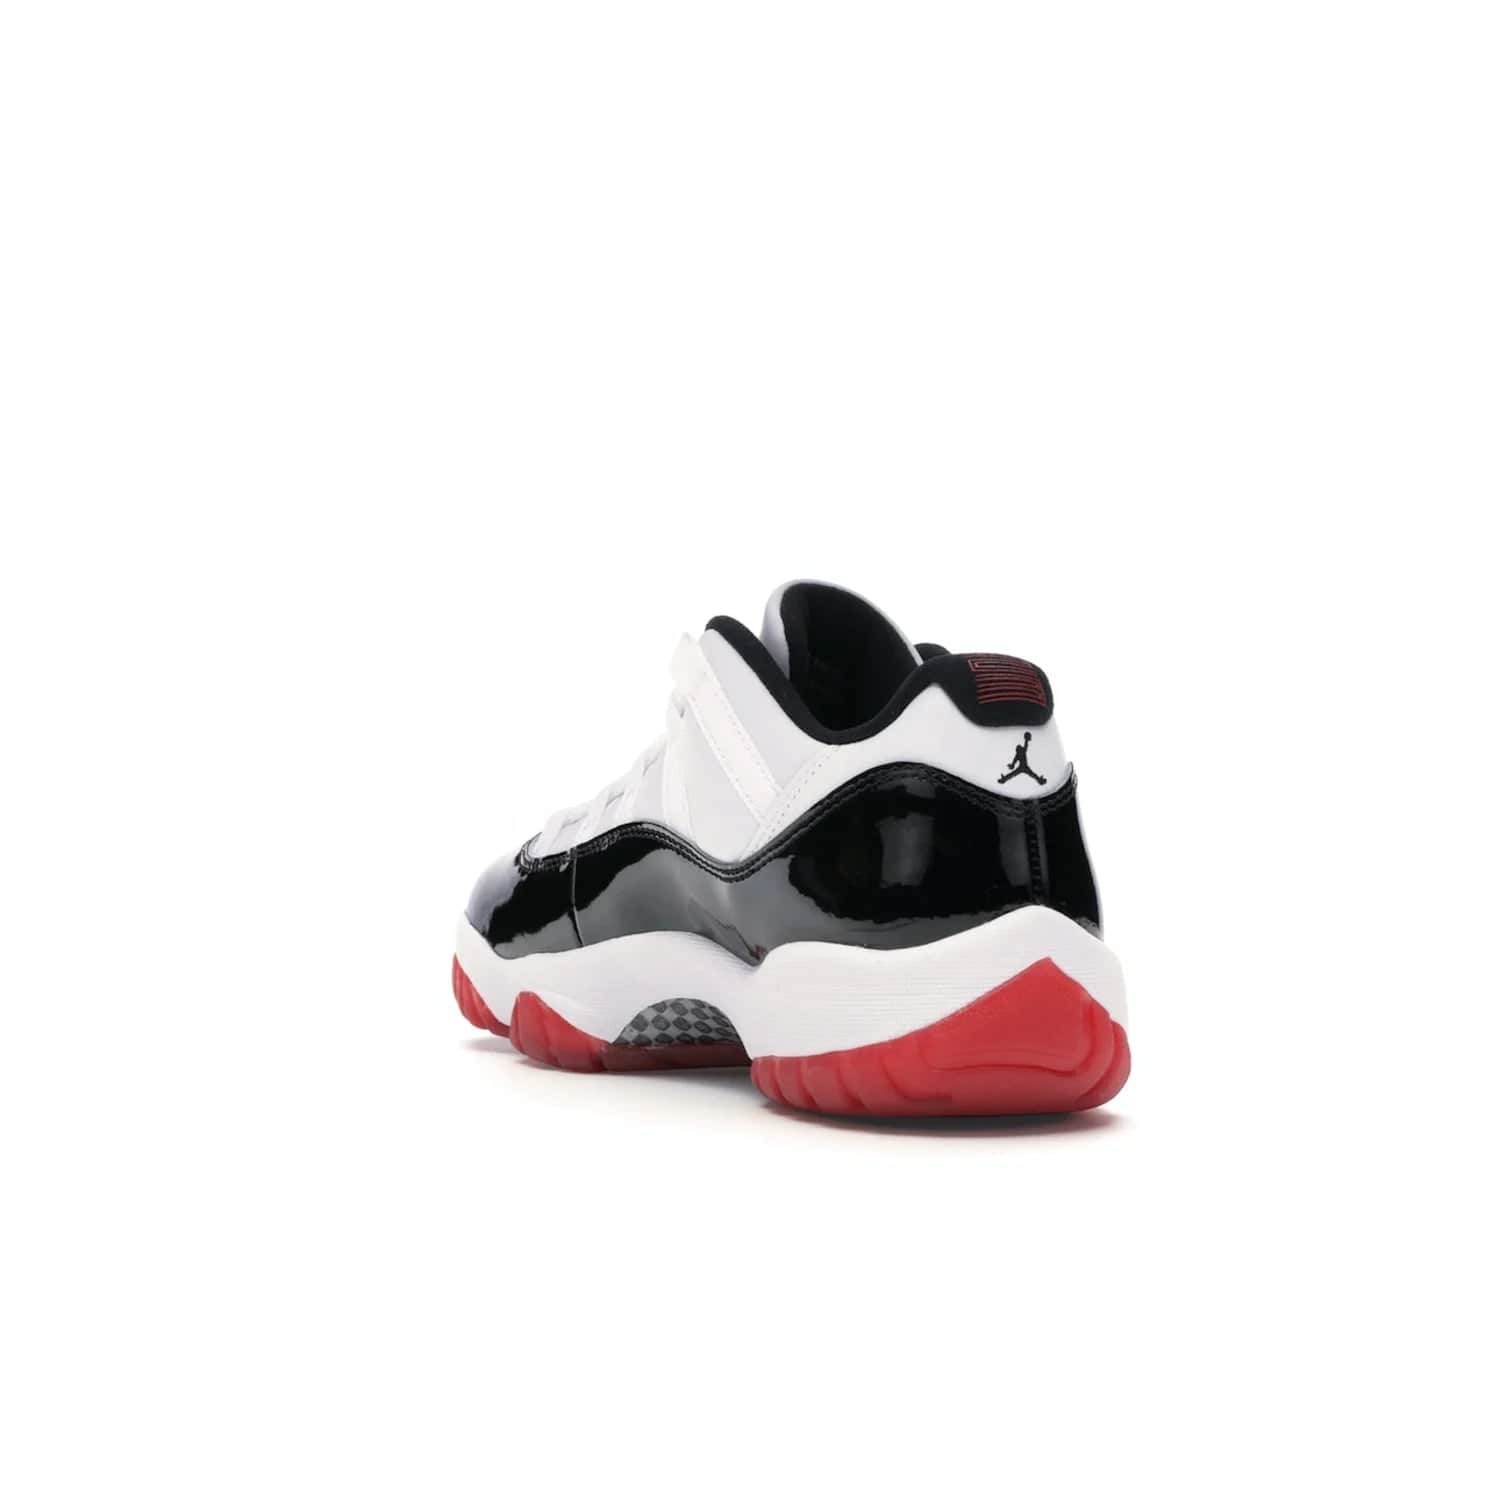 Jordan 11 Retro Low Concord Bred - Image 25 - Only at www.BallersClubKickz.com - Grab the classic Jordan 11 look with the Jordan 11 Retro Low Concord Bred. With white and black elements and the iconic red outsole of the Jordan 11 Bred, you won't miss a beat. Released in June 2020, the perfect complement to any outfit.